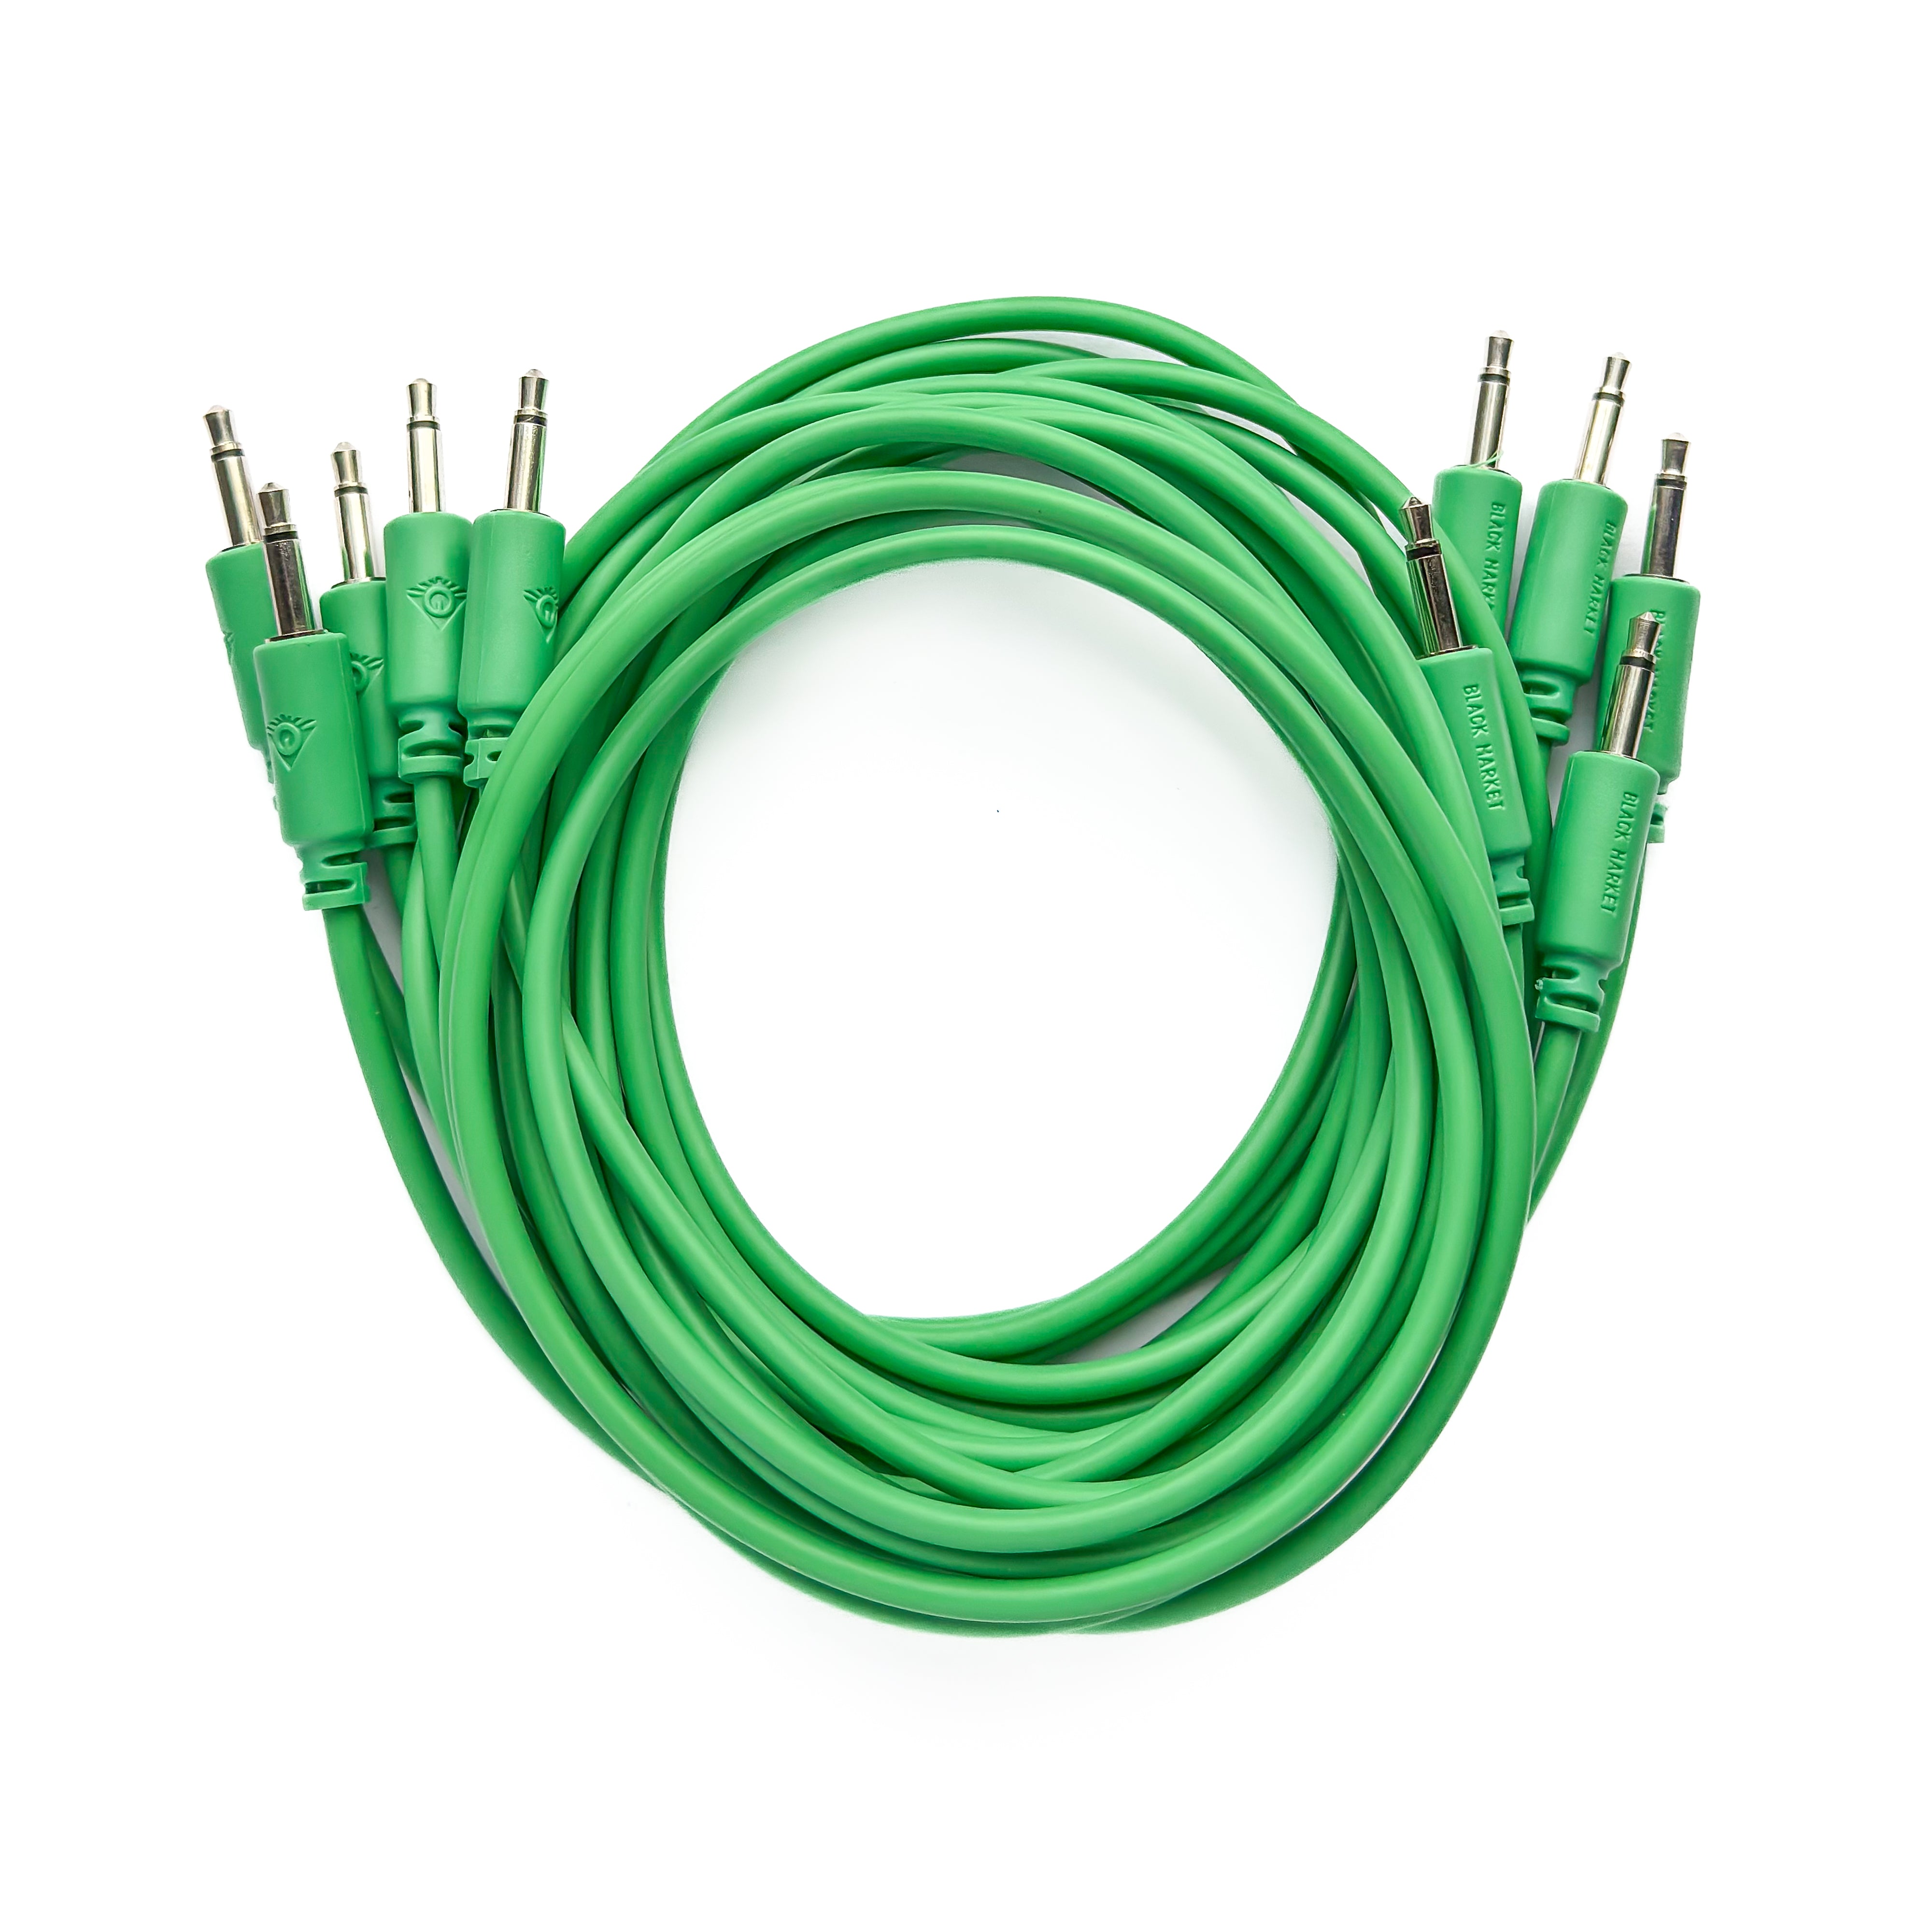 Black Market Modular 3.5mm Patch Cable 5-Pack - 100cm/40" - Green View 1